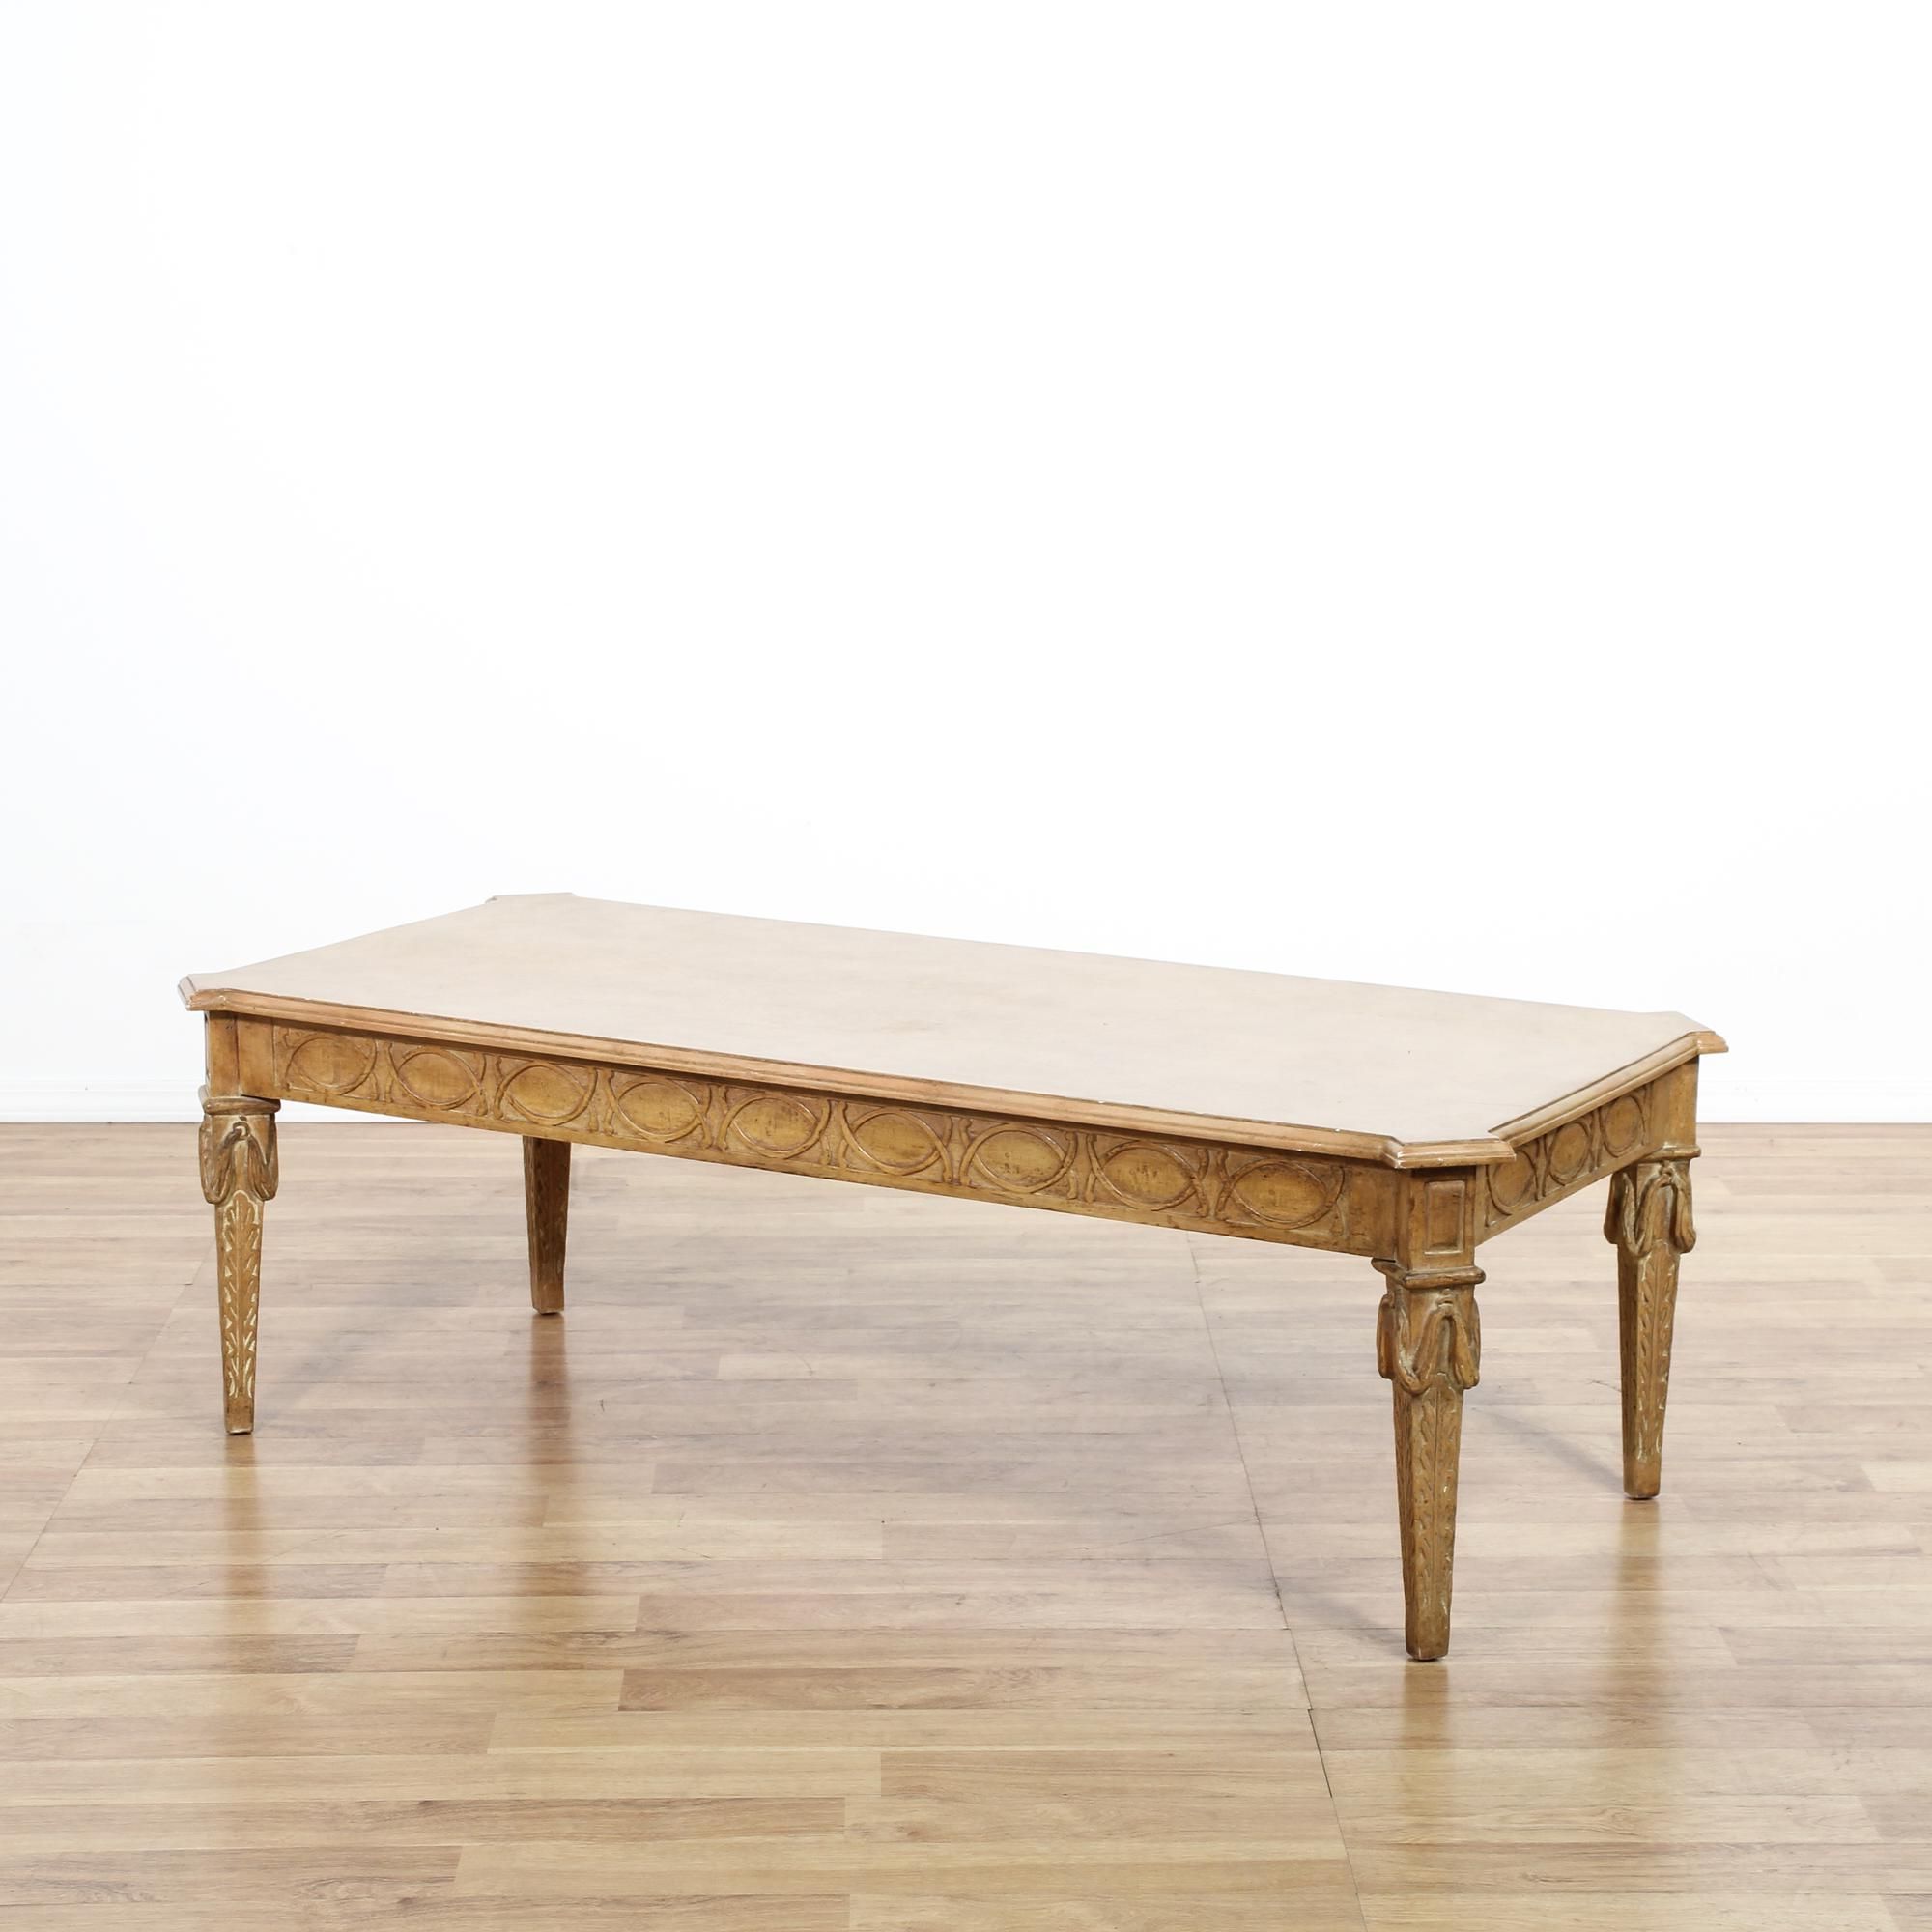 This Carved Coffee Table Is Featured In A Solid Wood With Within 2020 Oceanside White Washed Coffee Tables (View 3 of 20)